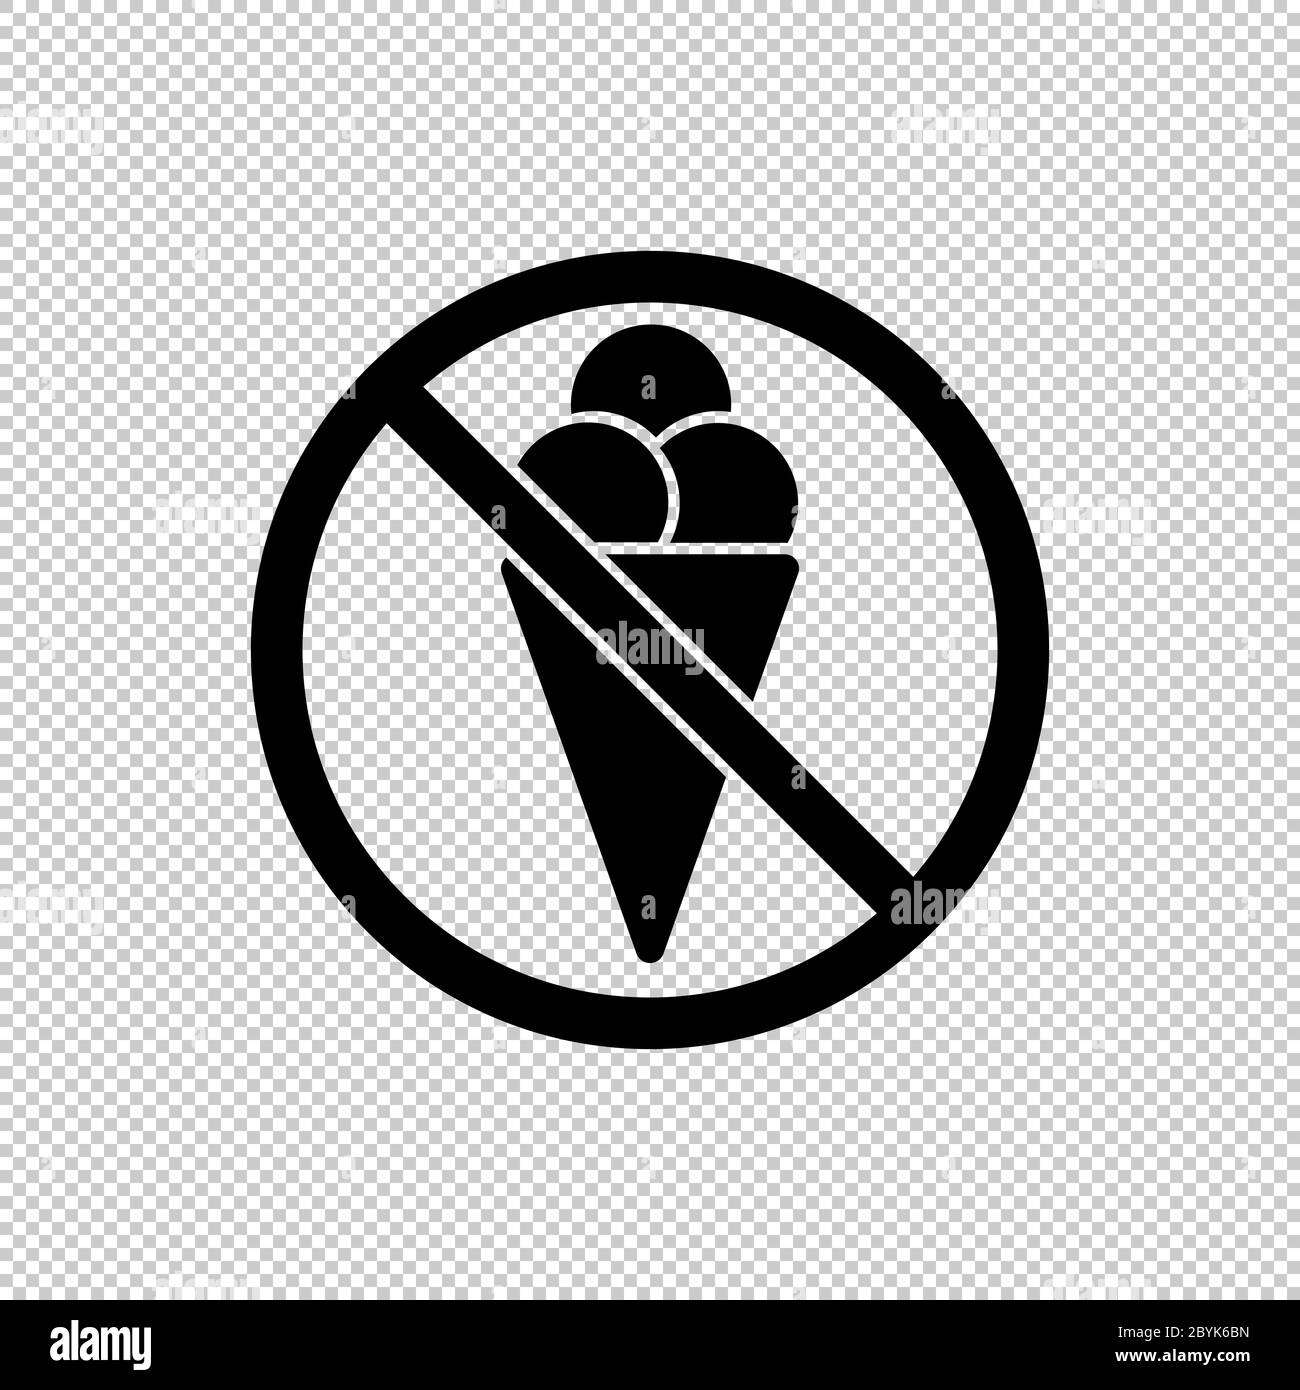 Stop food, no ice cream or no eating icon in black. Forbidden symbol simple on isolated background. EPS 10 vector. Stock Vector